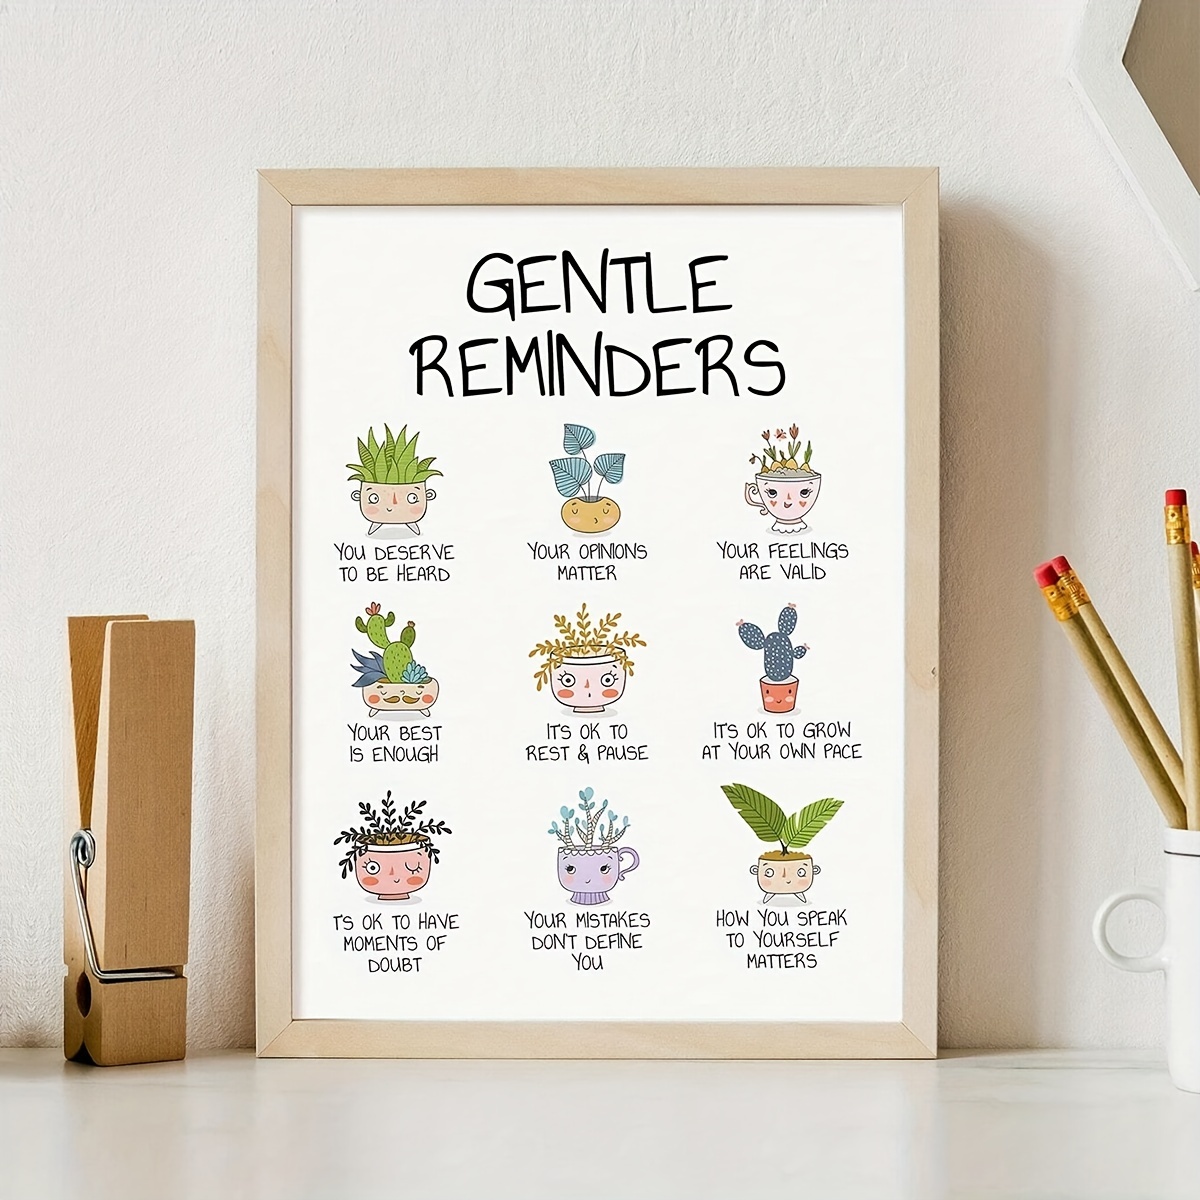 

Health Positive Affirmations, Inspirational Mental Canvas Wall Art Decor, Therapy Counselor Gentle Reminders Poster Painting, For Classroom, Bedroom, Nursery Picture Artwork Decor (framed)